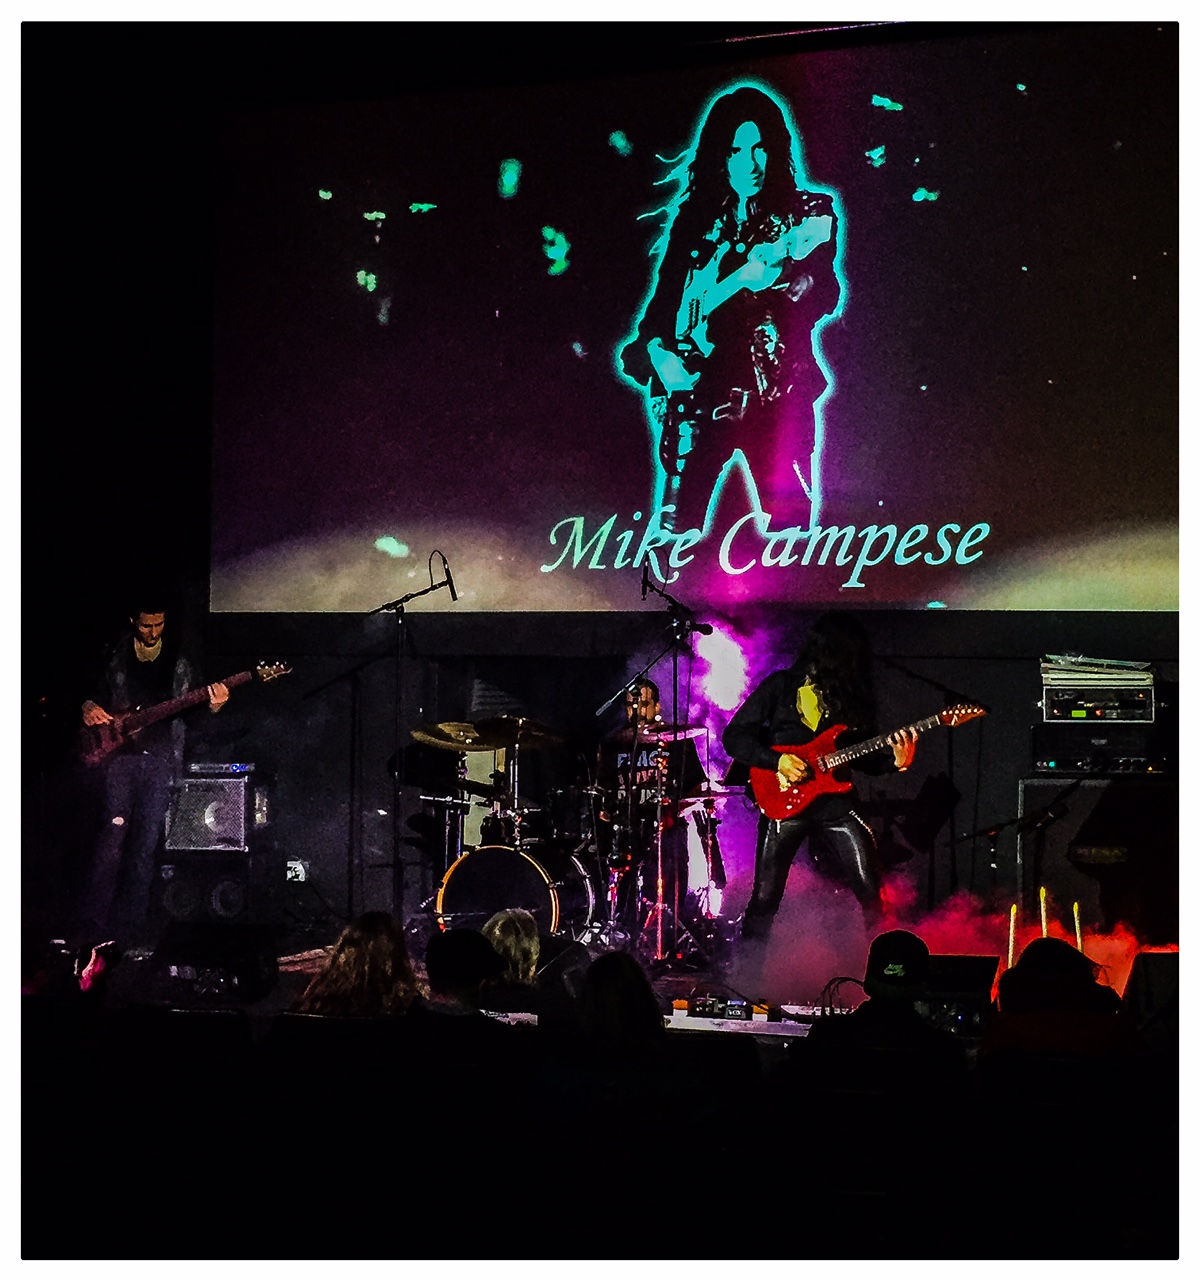 Mike Campese - The Madison Theater - Holiday show, banner.